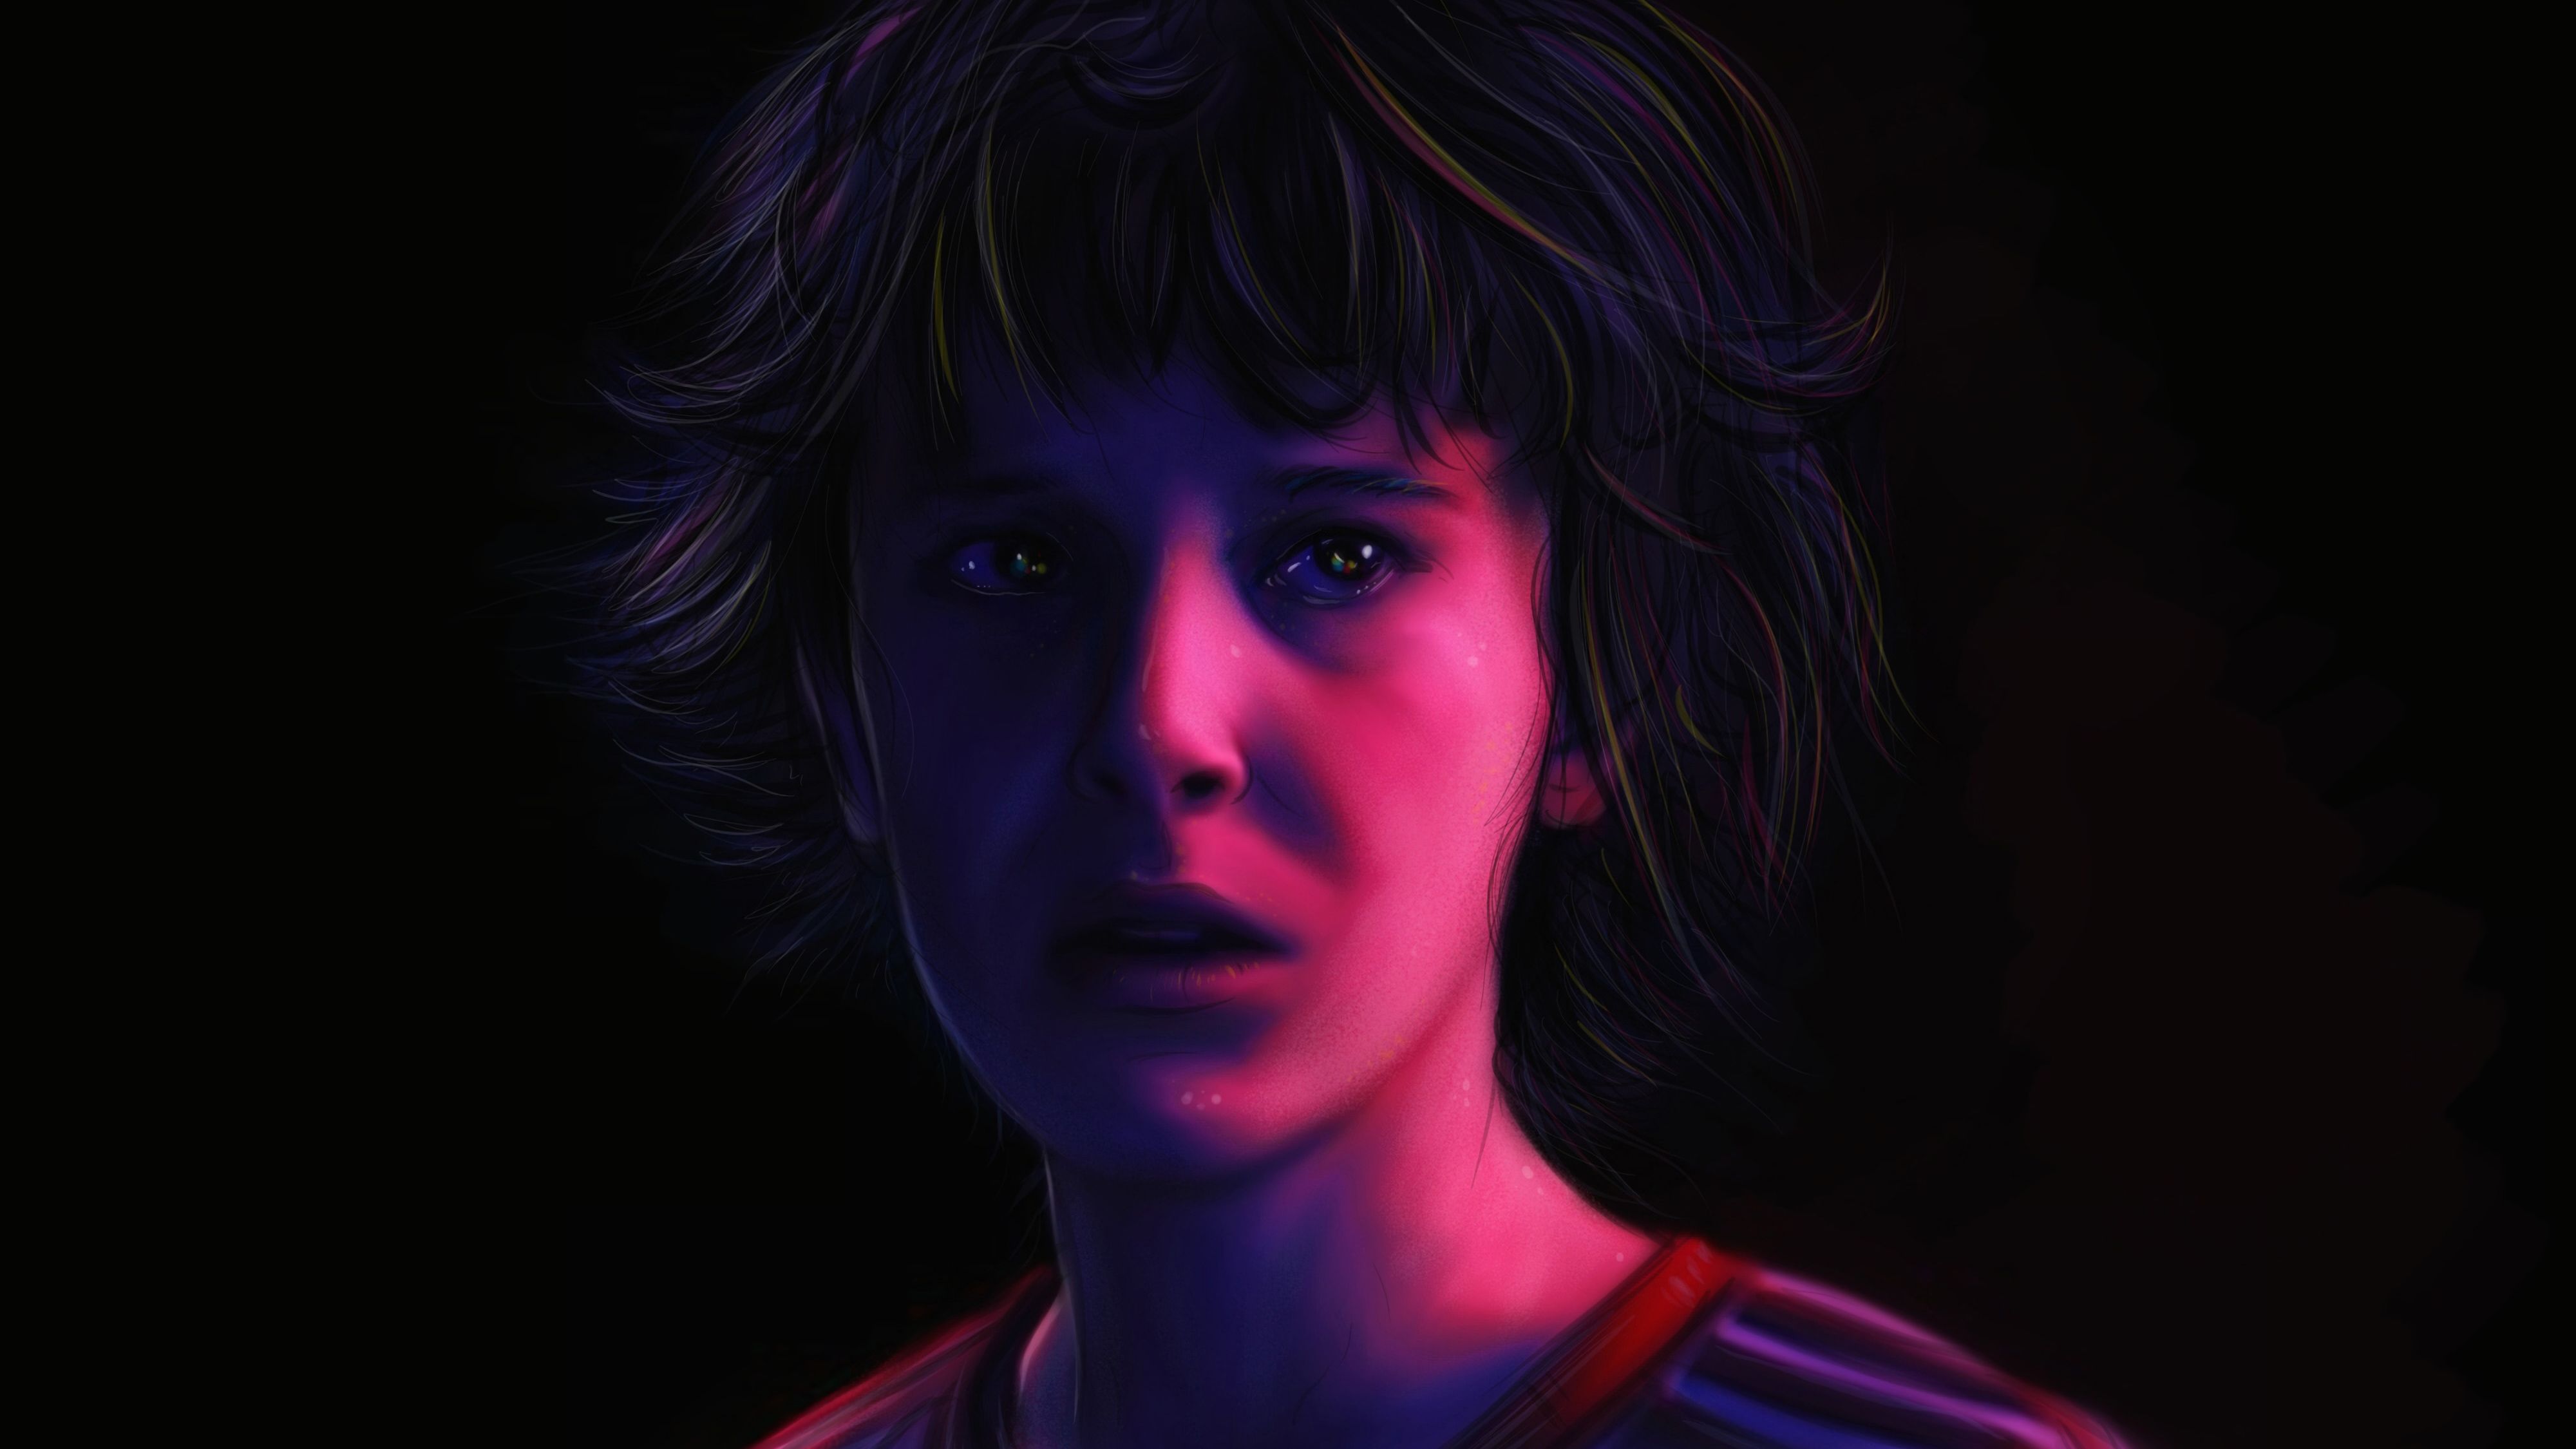 Stranger Things Eleven 4k Artwork New, HD Tv Shows, 4k Wallpaper, Image, Background, Photo and Picture